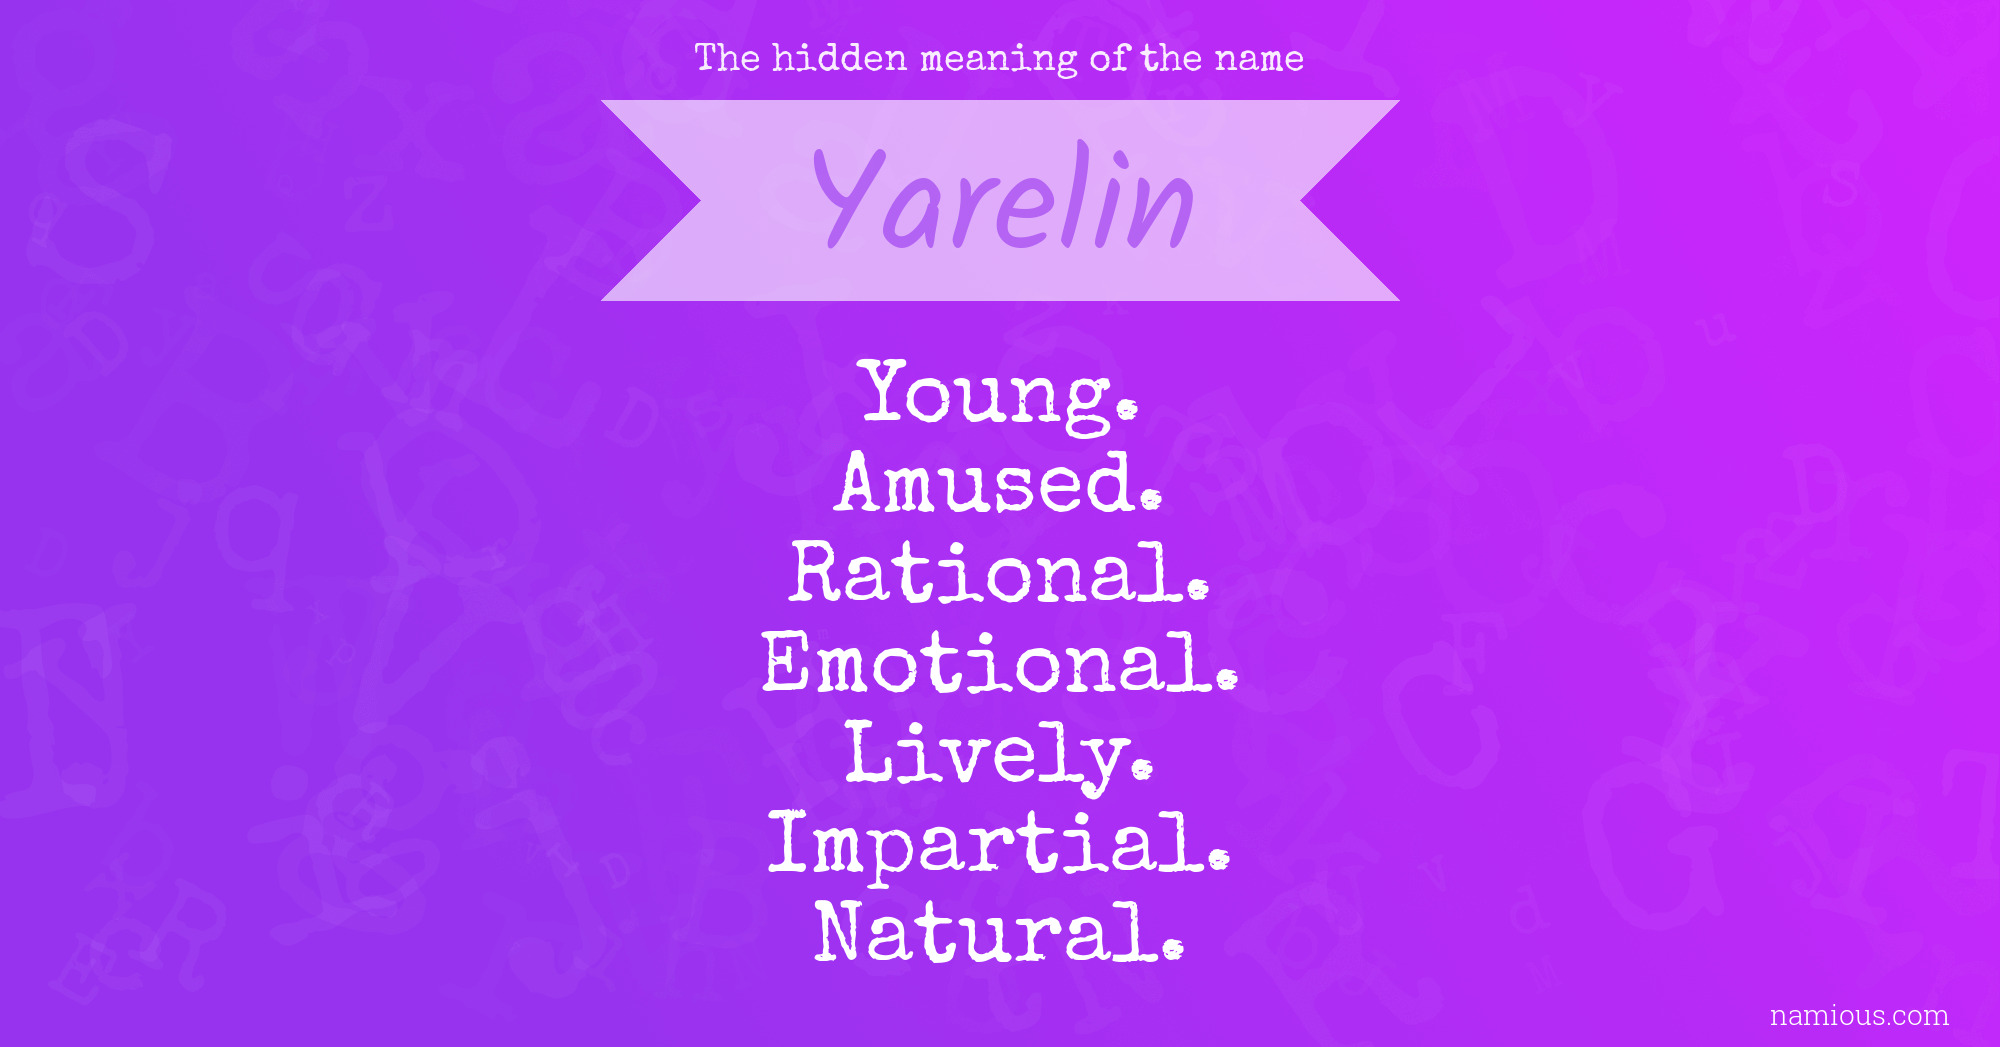 The hidden meaning of the name Yarelin